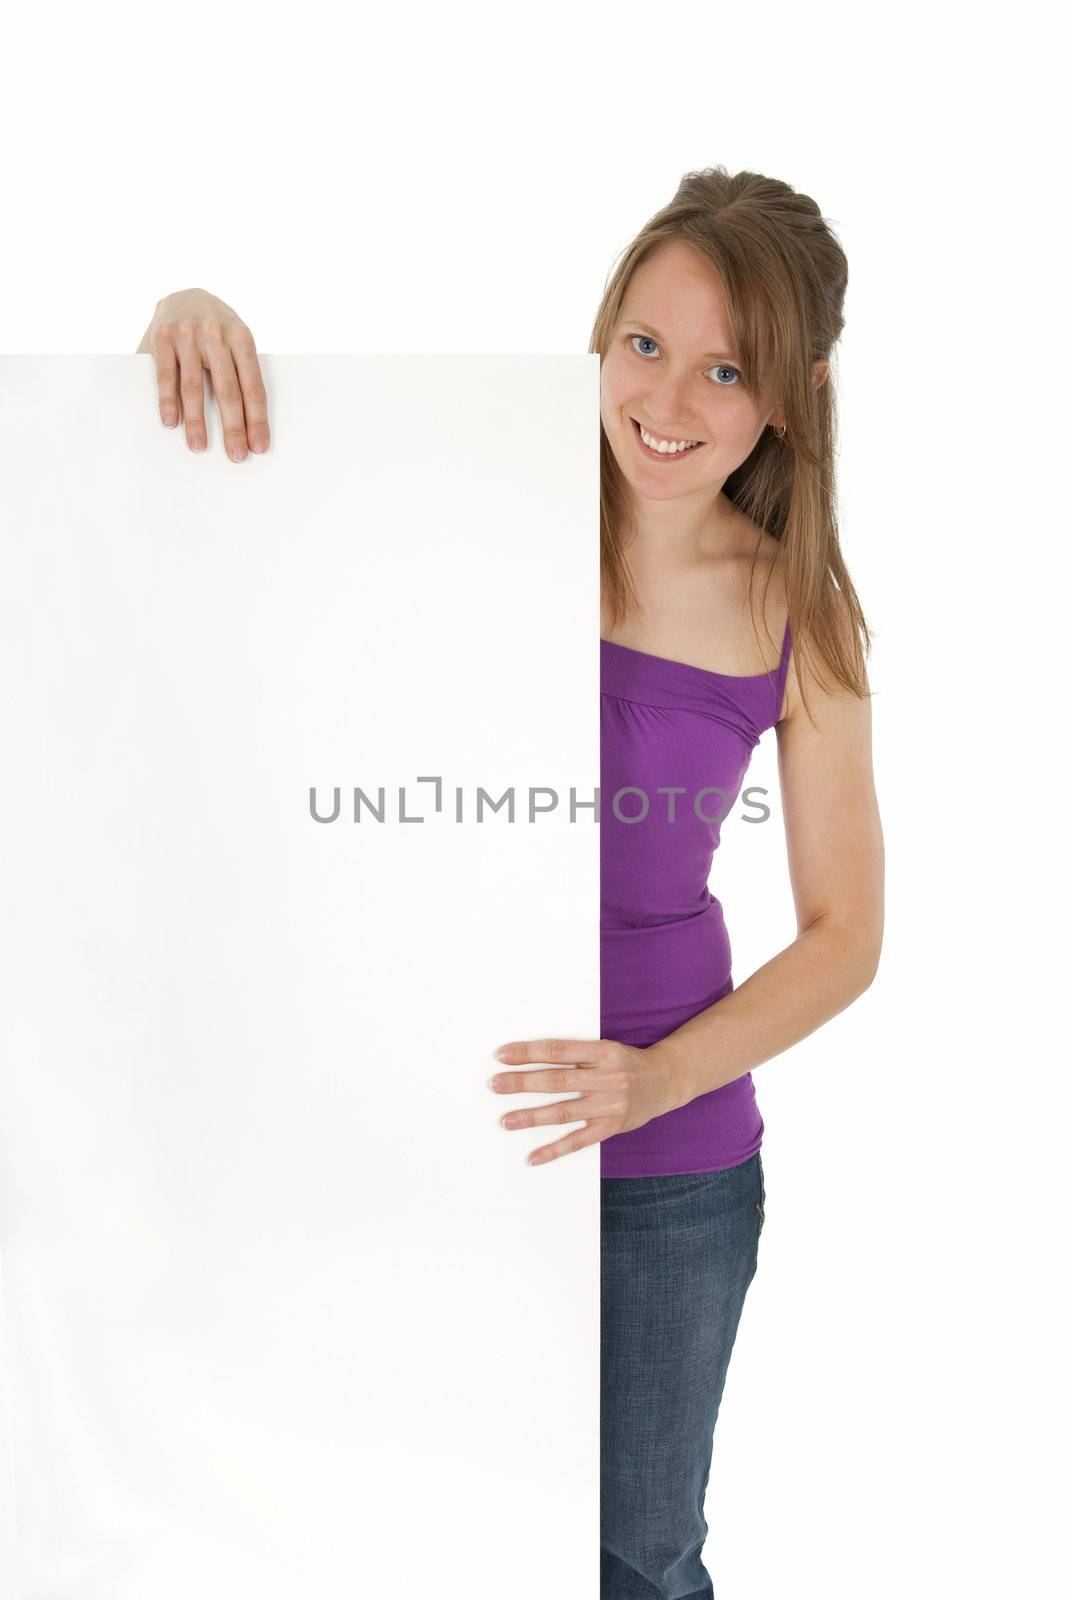 Casual young women holding a blank banner ad, smiling. Isolated on white.